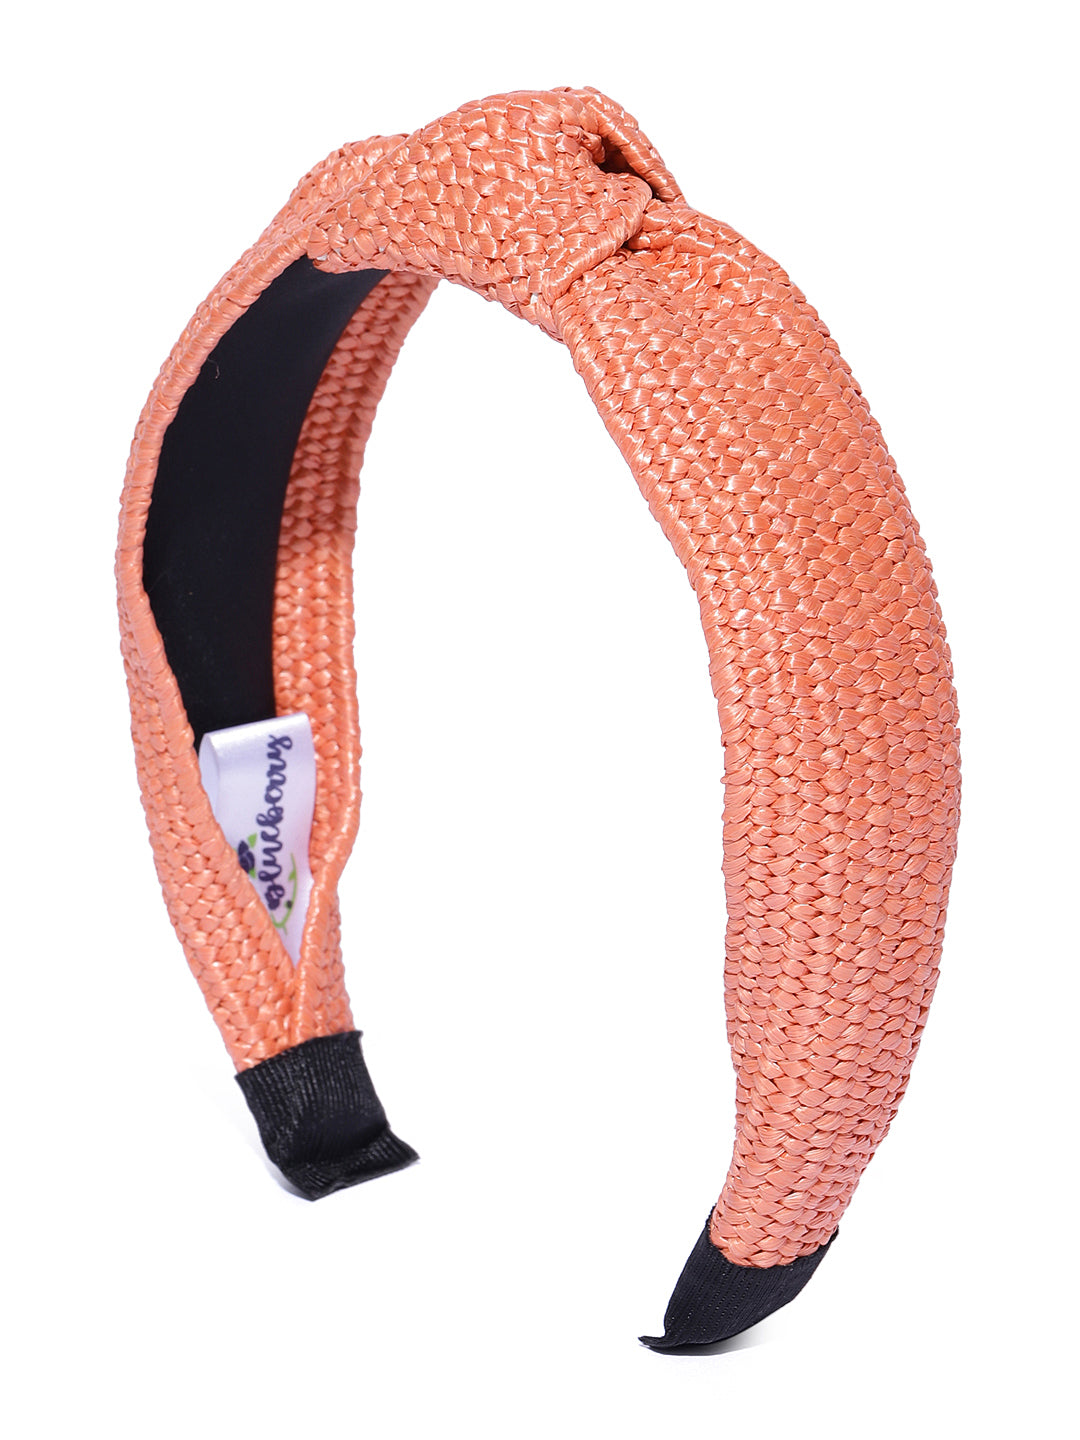 Blueberry Coral jute knot hair band